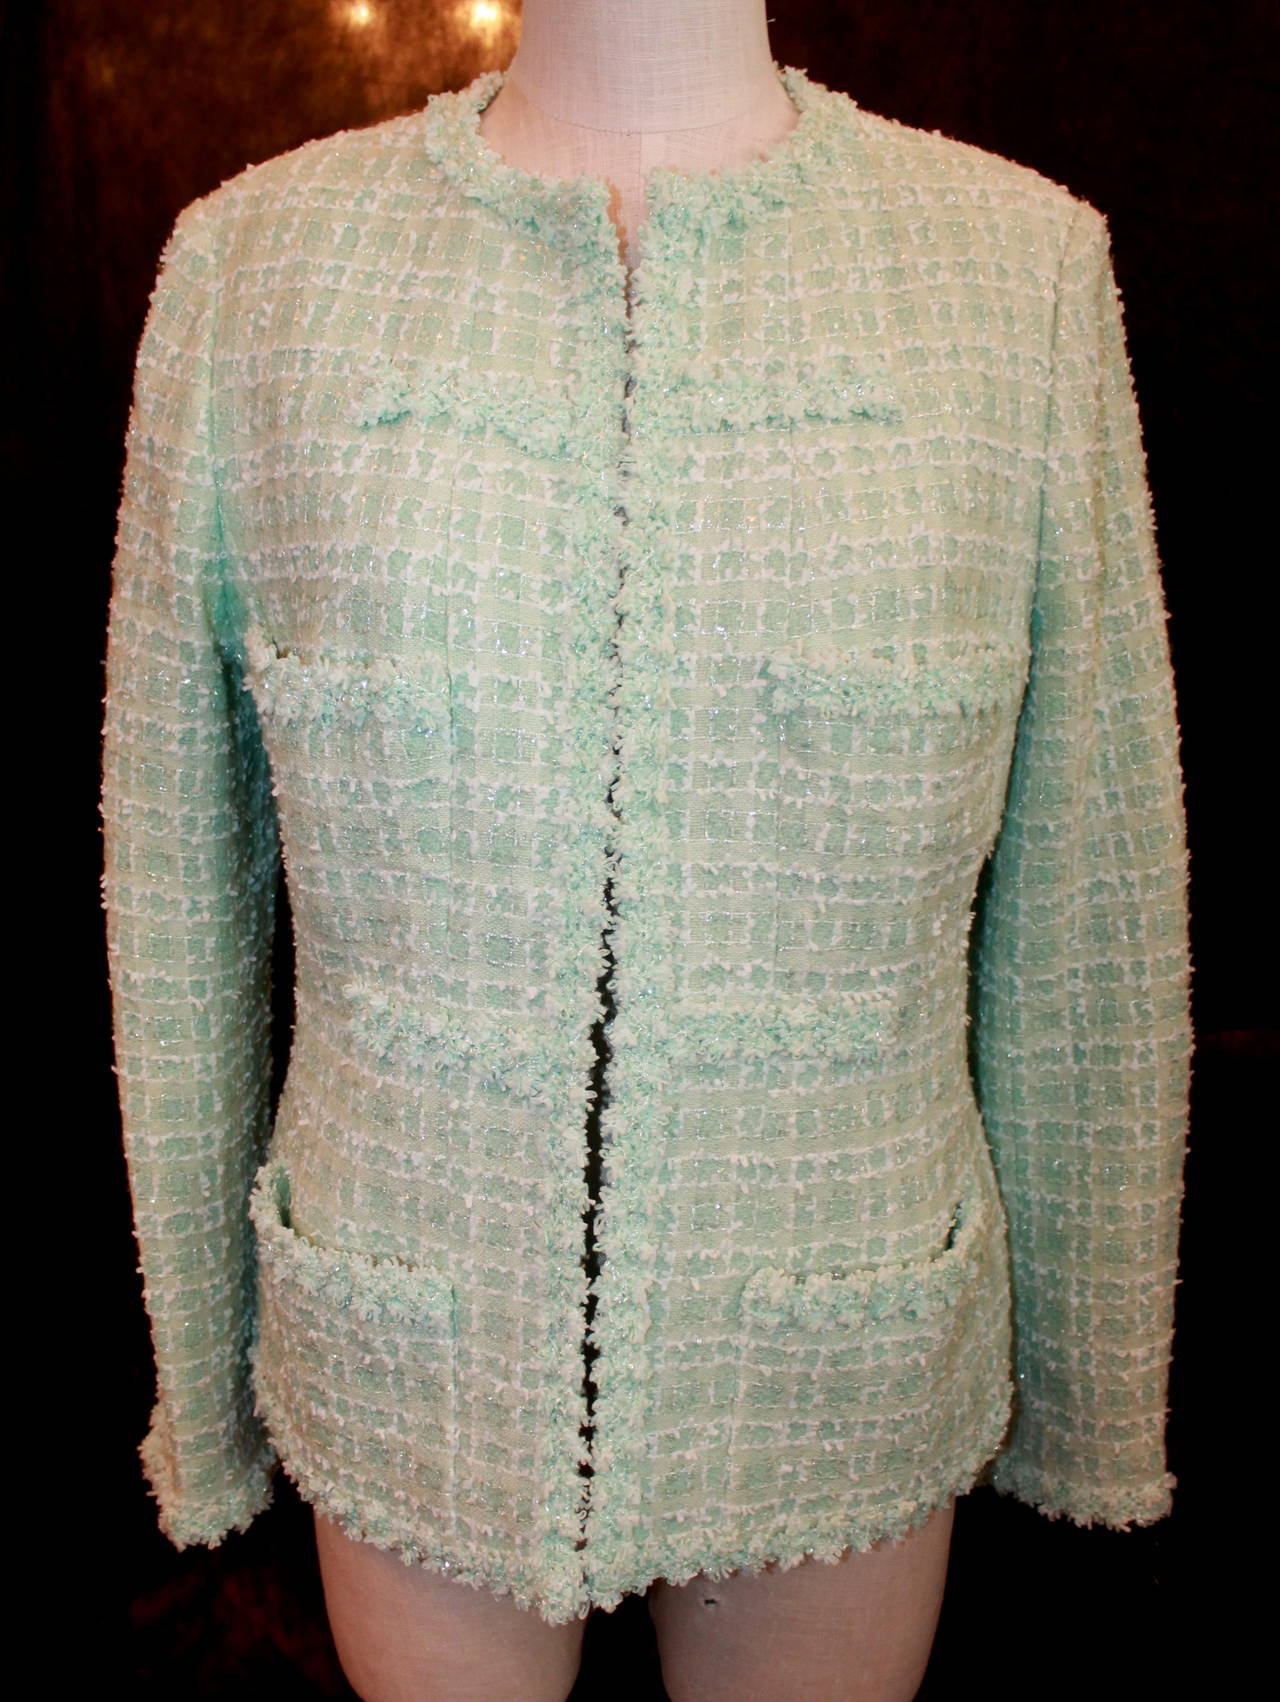 Chanel 1995 Vintage Mint Tweed Jacket with 4 Pockets - 42. This jacket is in excellent condition. The tweed trimming has a clear tinsel-like material woven into it. It does not have buttons to close the jacket.

Measurements:
Bust- 37